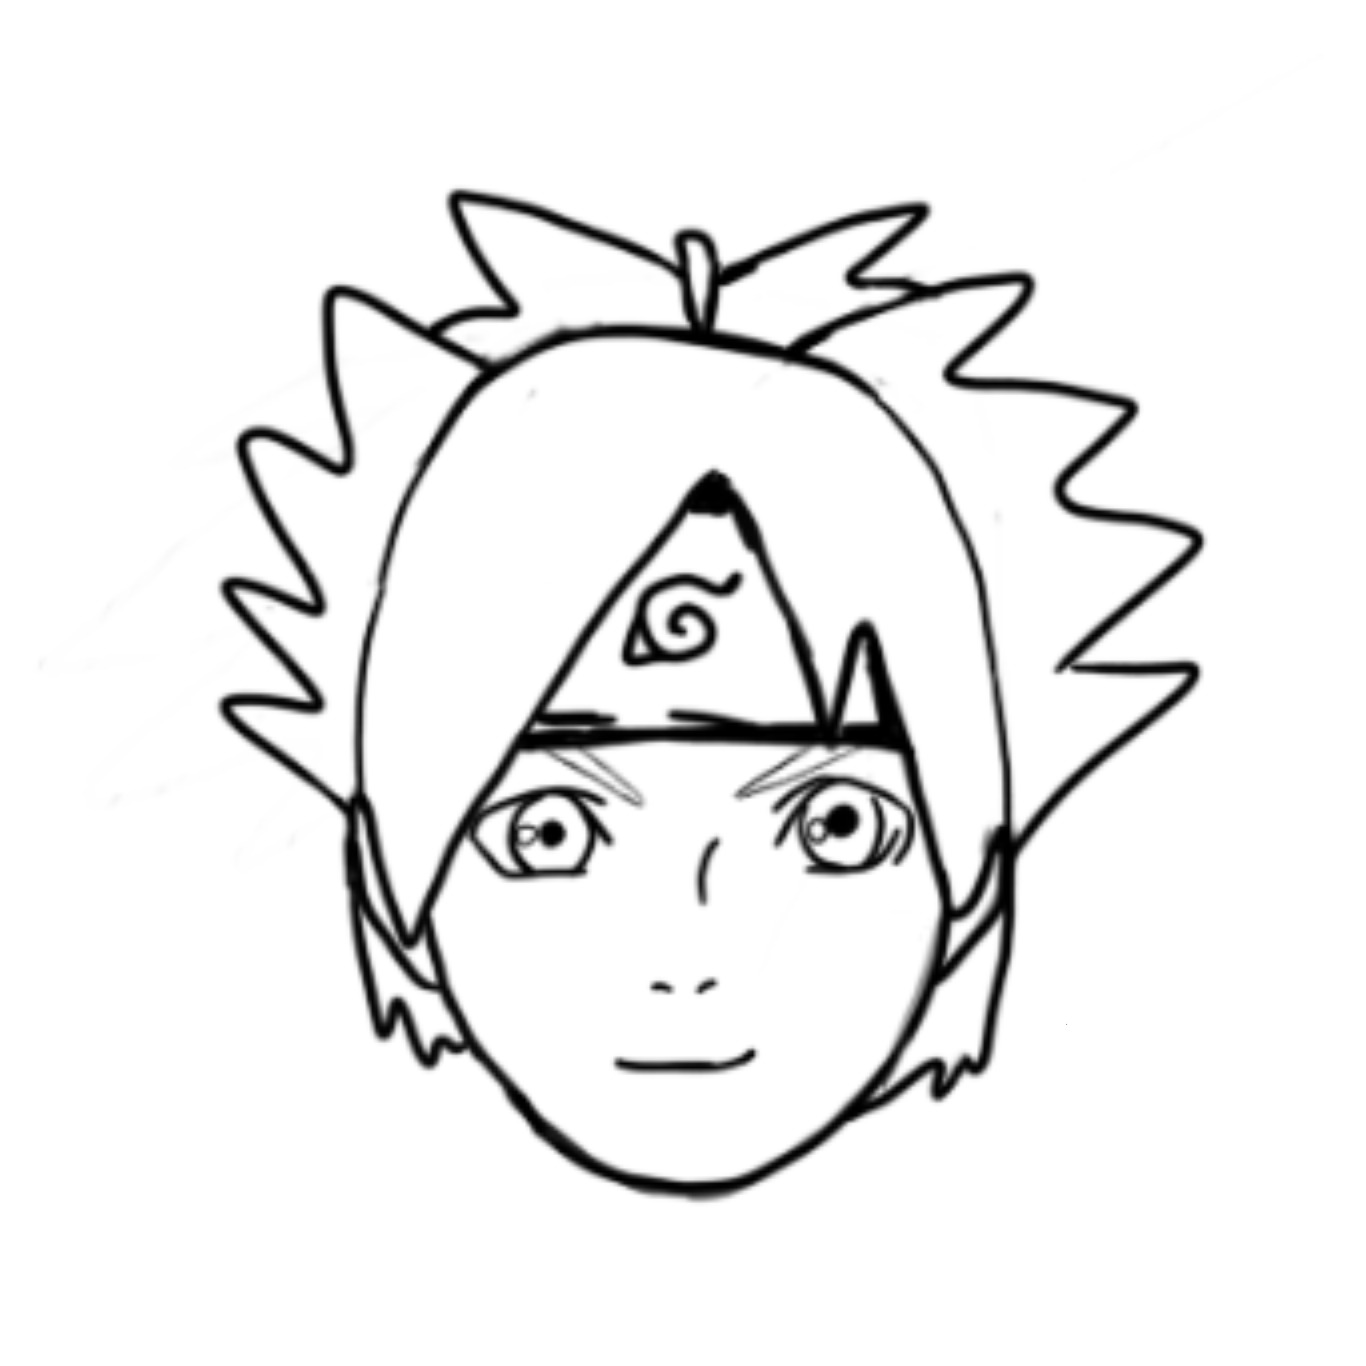 How to draw Boruto - Apps on Google Play